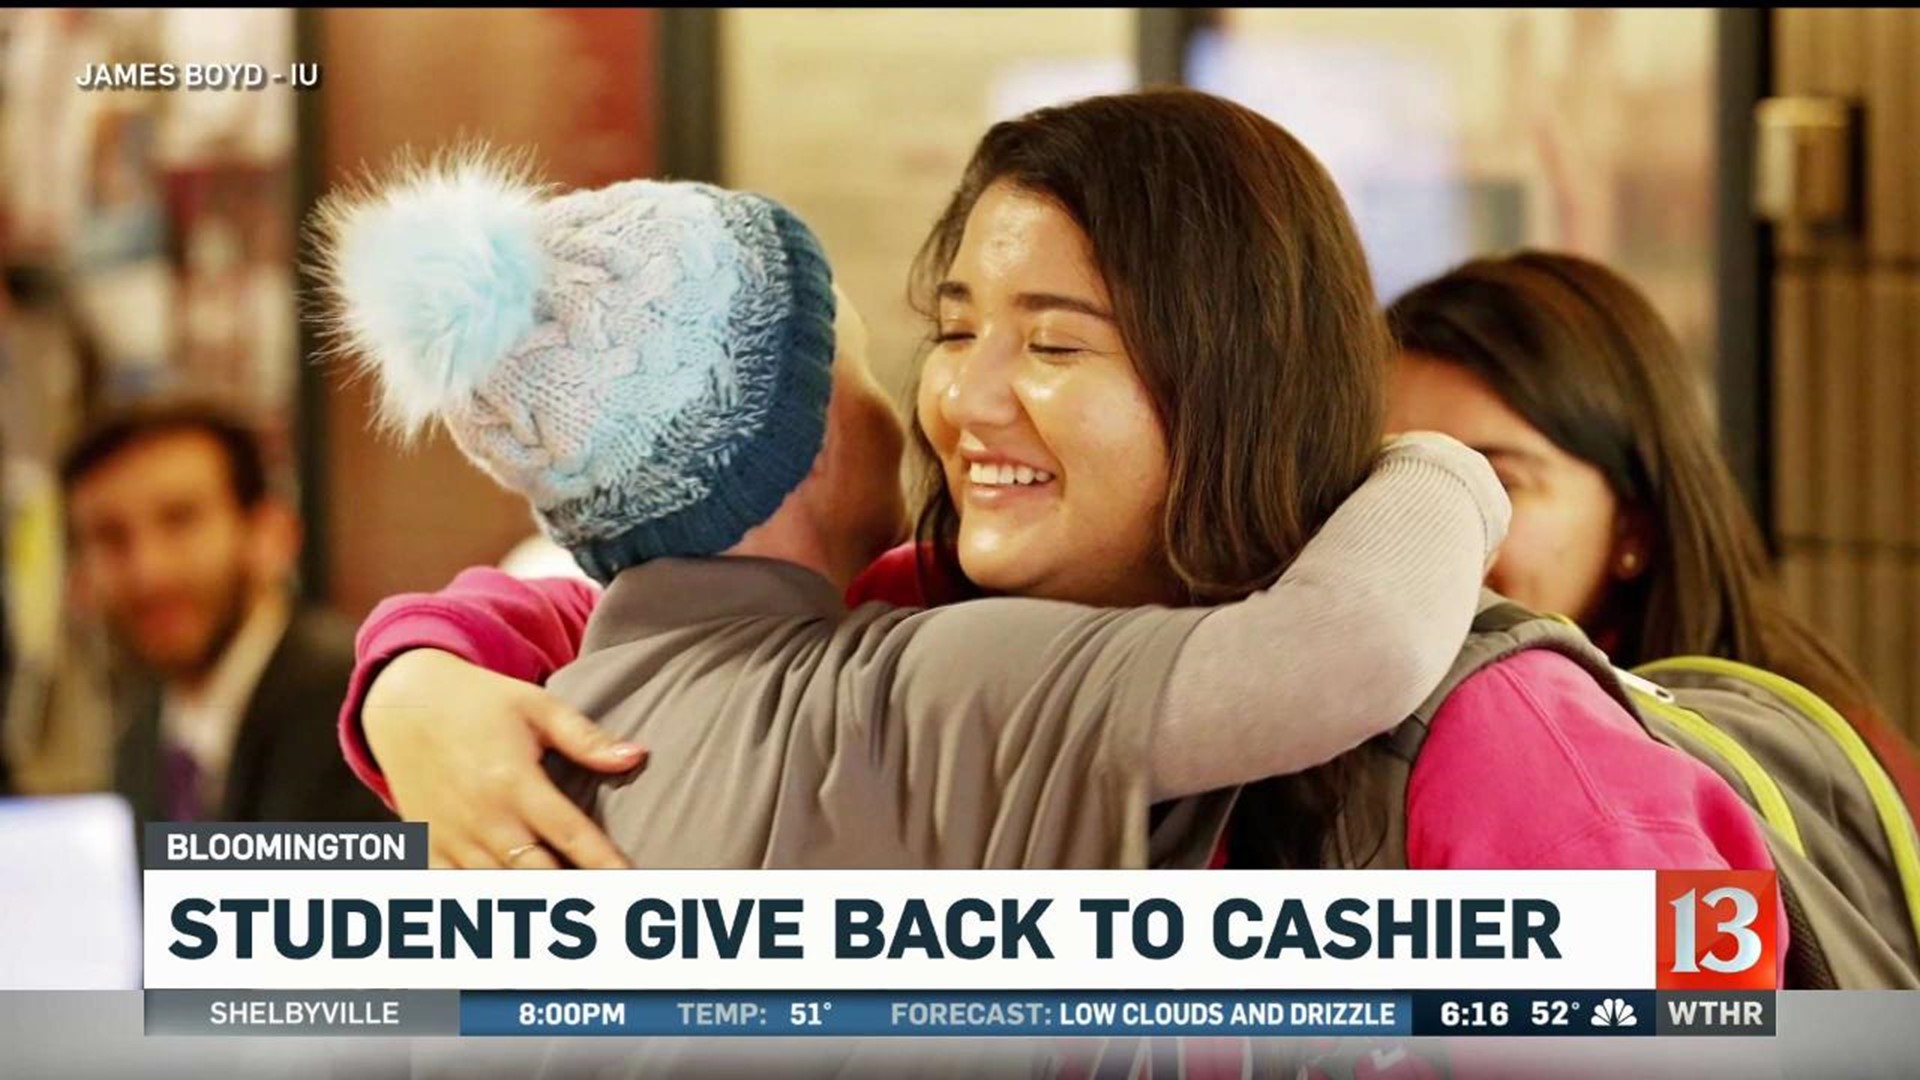 Students give back to cashier